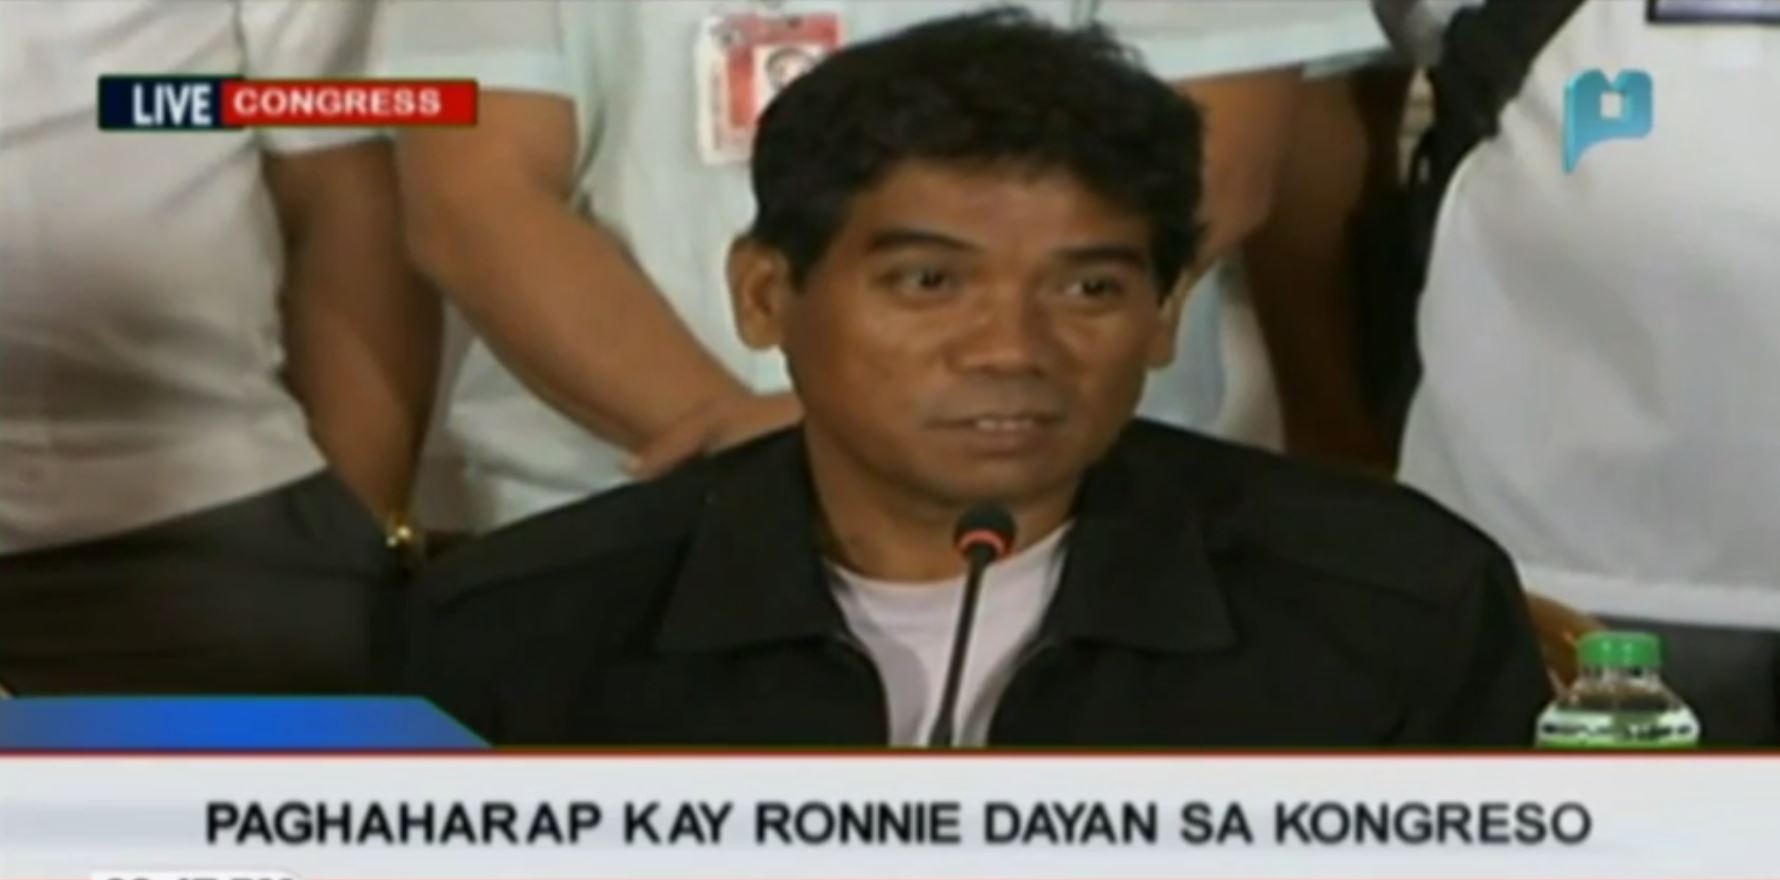 In a press conference at the House of Representatives on Tuesday night, Ronnie Dayan admits he received money from Kerwin Espinosa for then Justice Secretary Leila de Lima in 2014. (Photo grabbed from PTV 4 video)